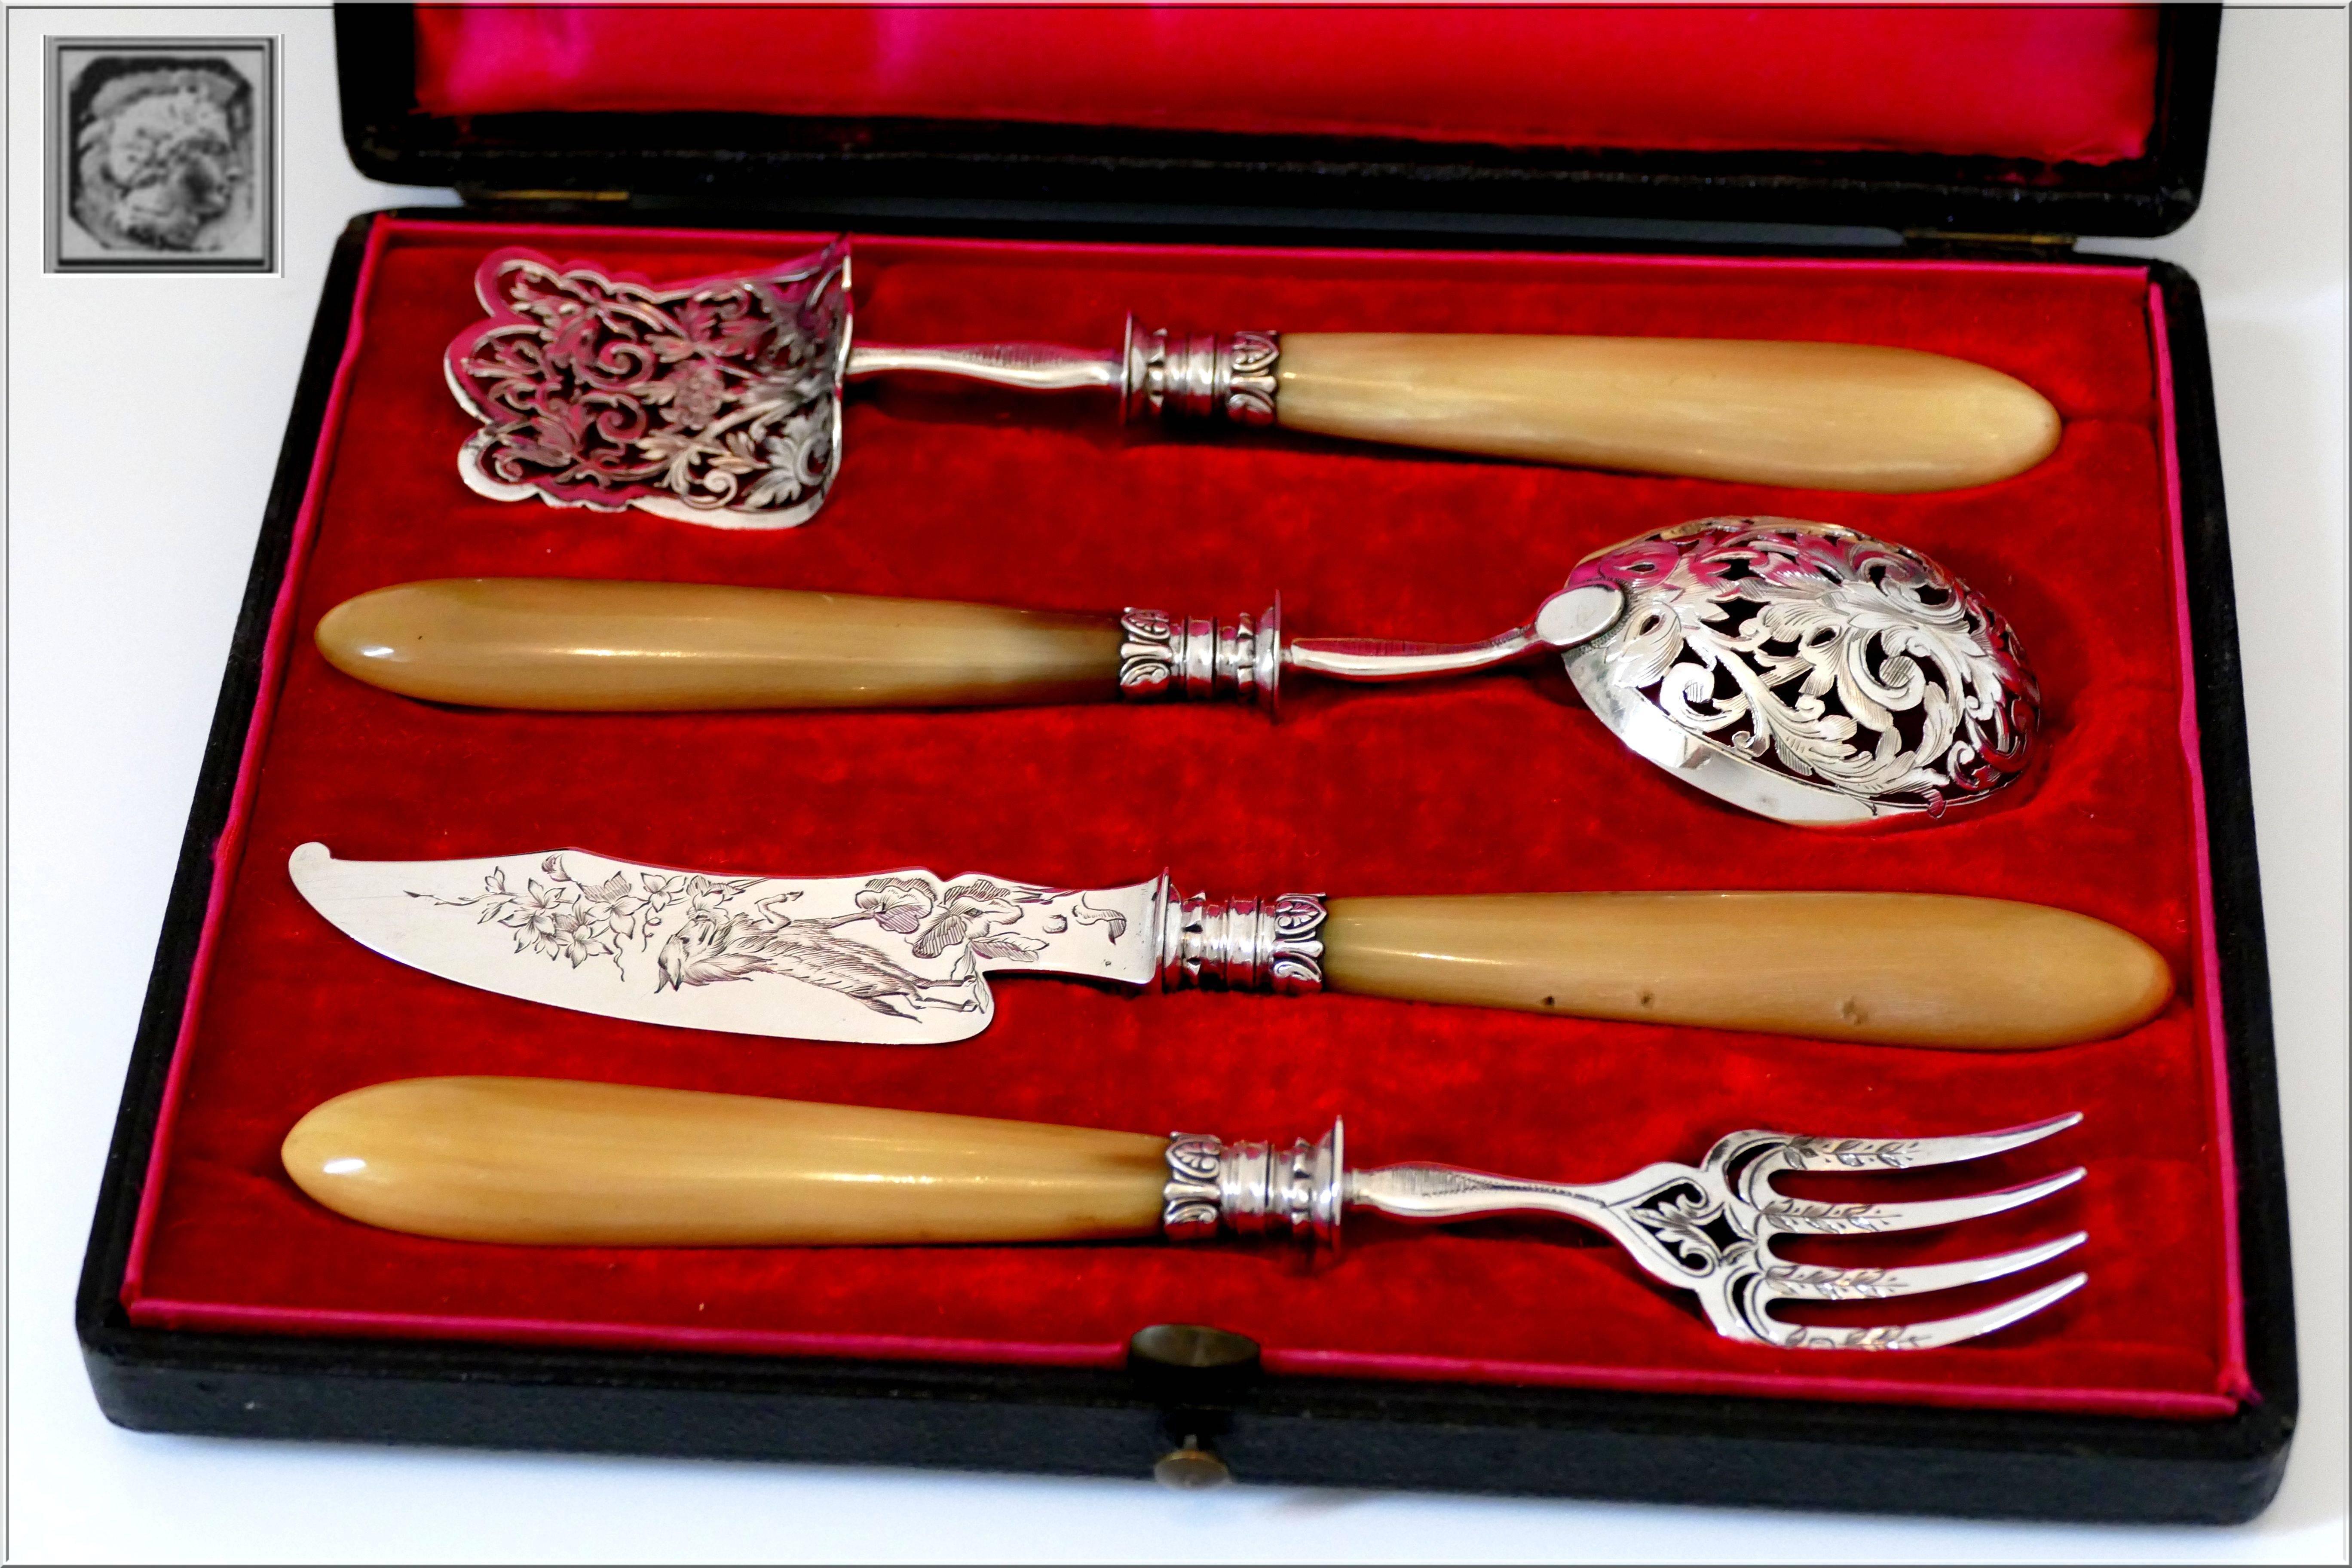 Early 20th Century 1900s Rare French Sterling Silver & Horn Dessert Hors D'oeuvre Set 4 pc w/box